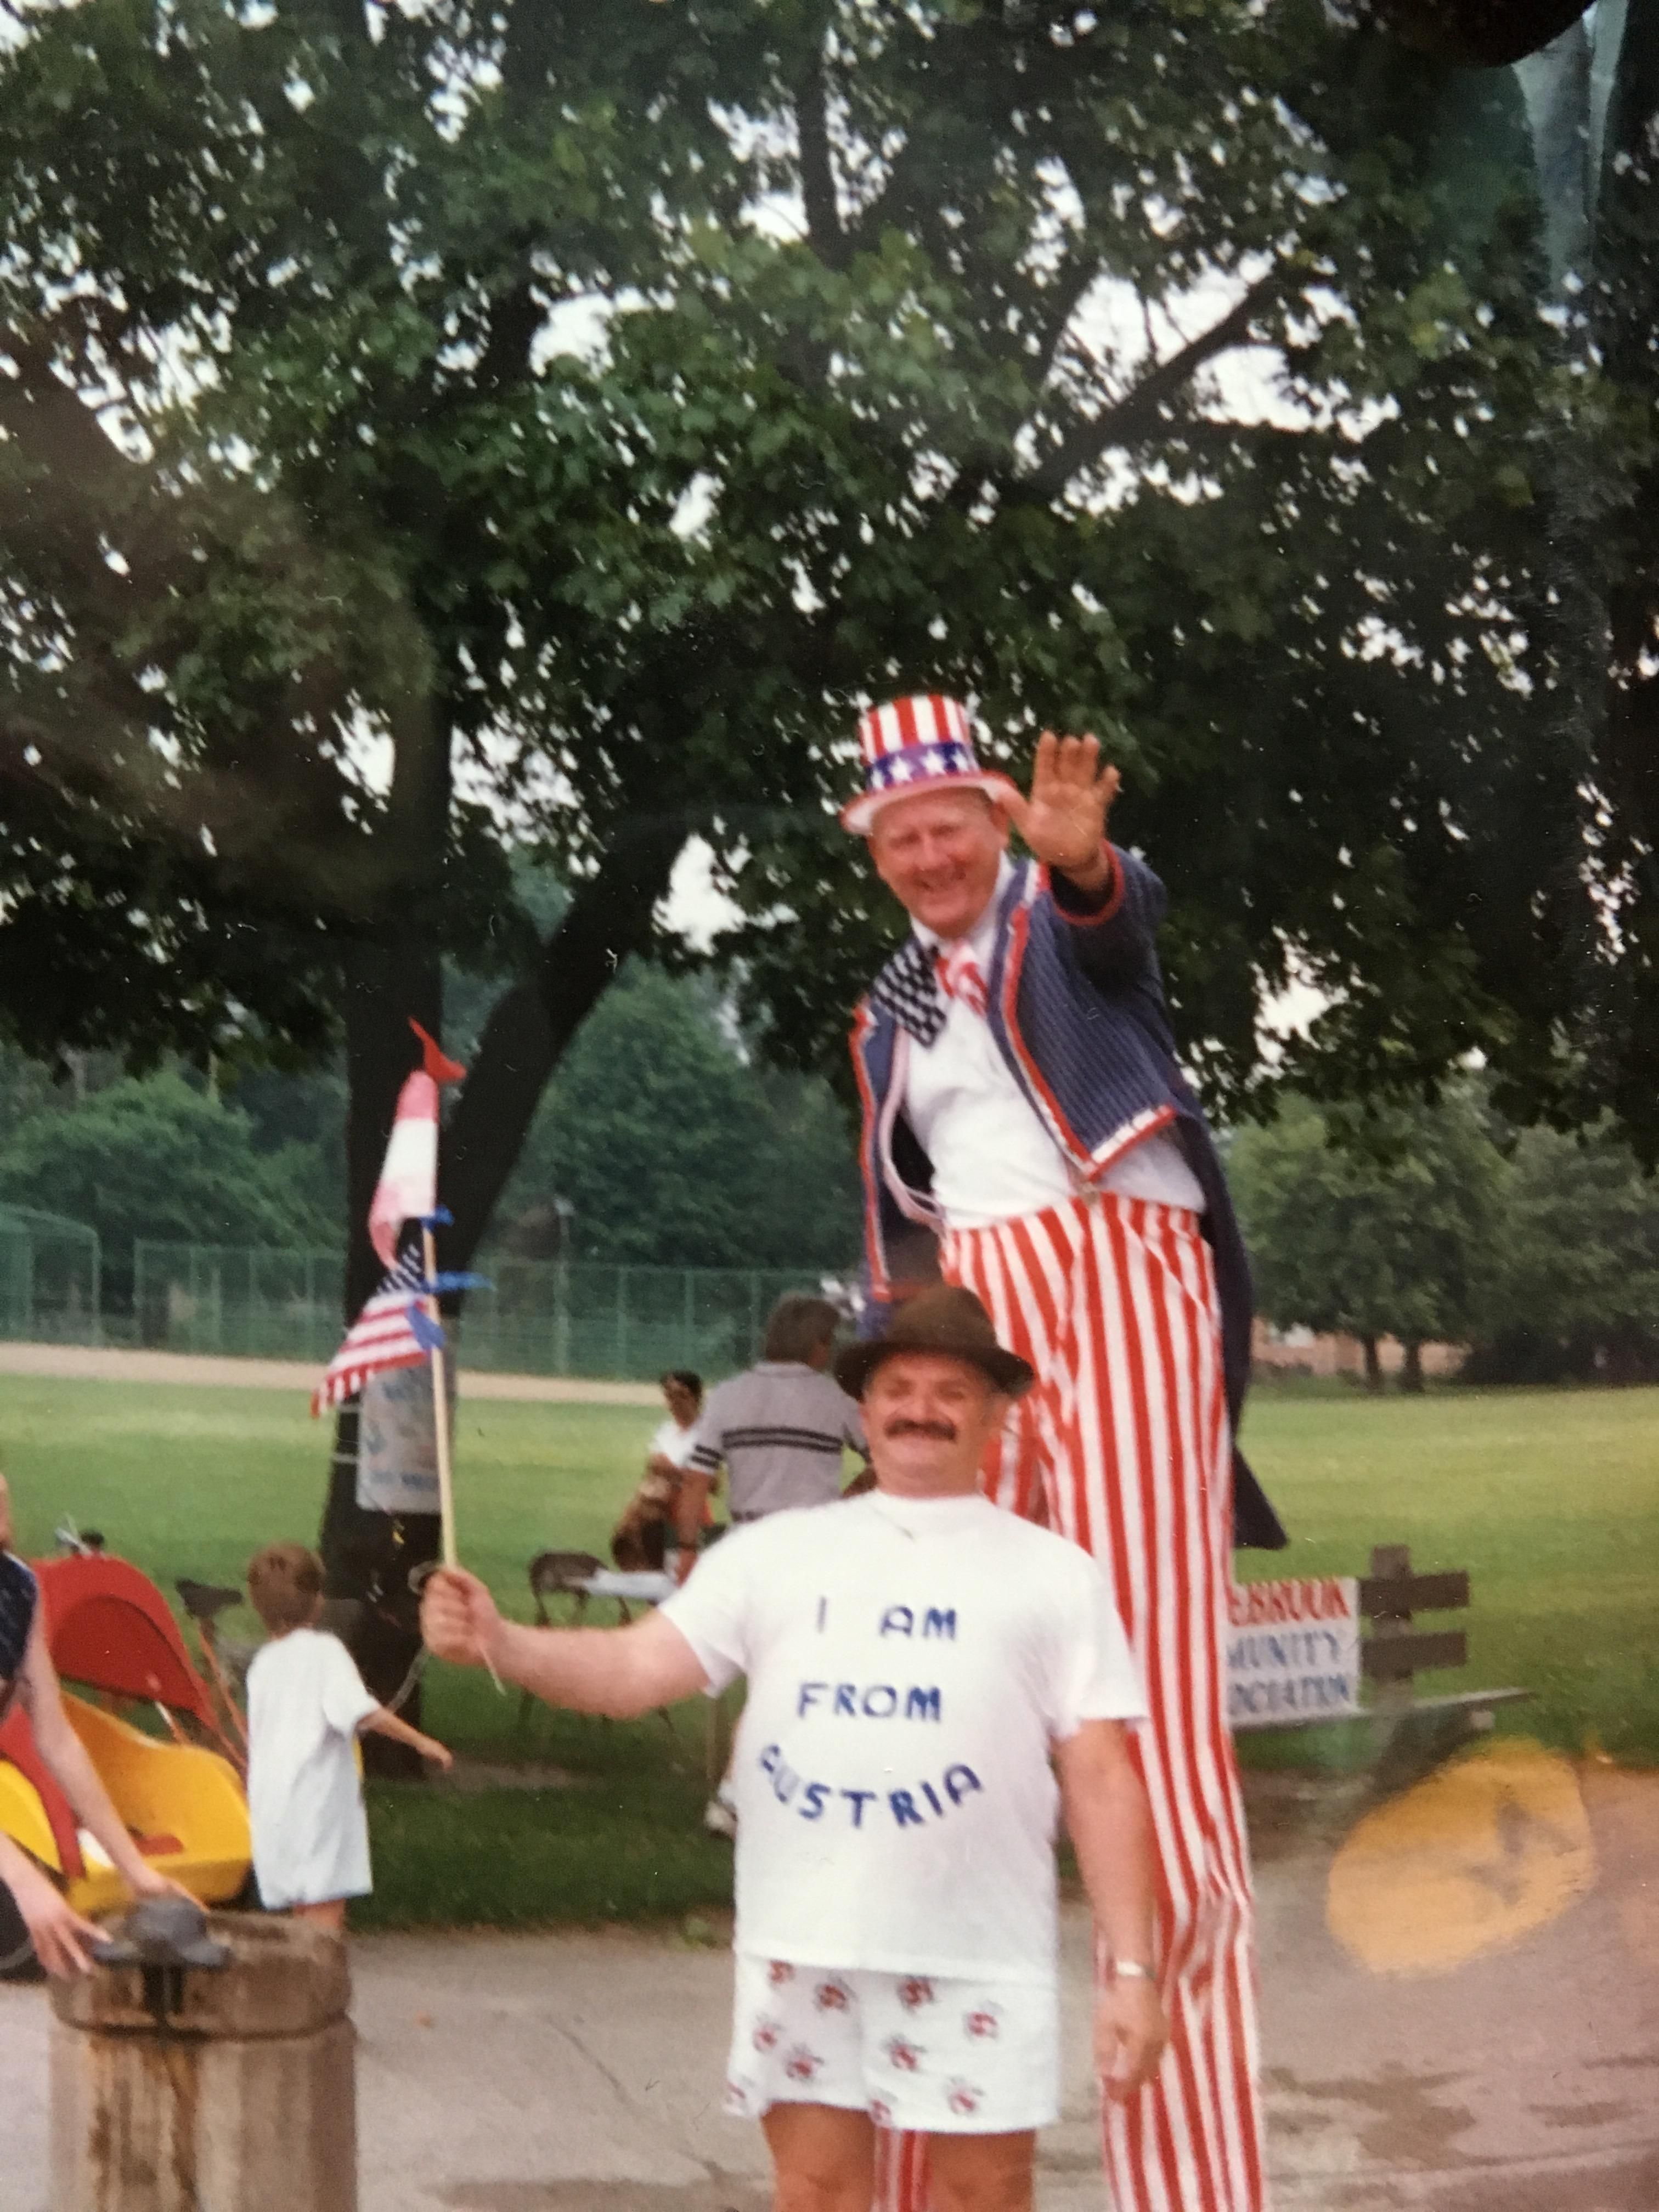 My uncle came to America only once in his life. Here he is in Chicago on the 4th of July.